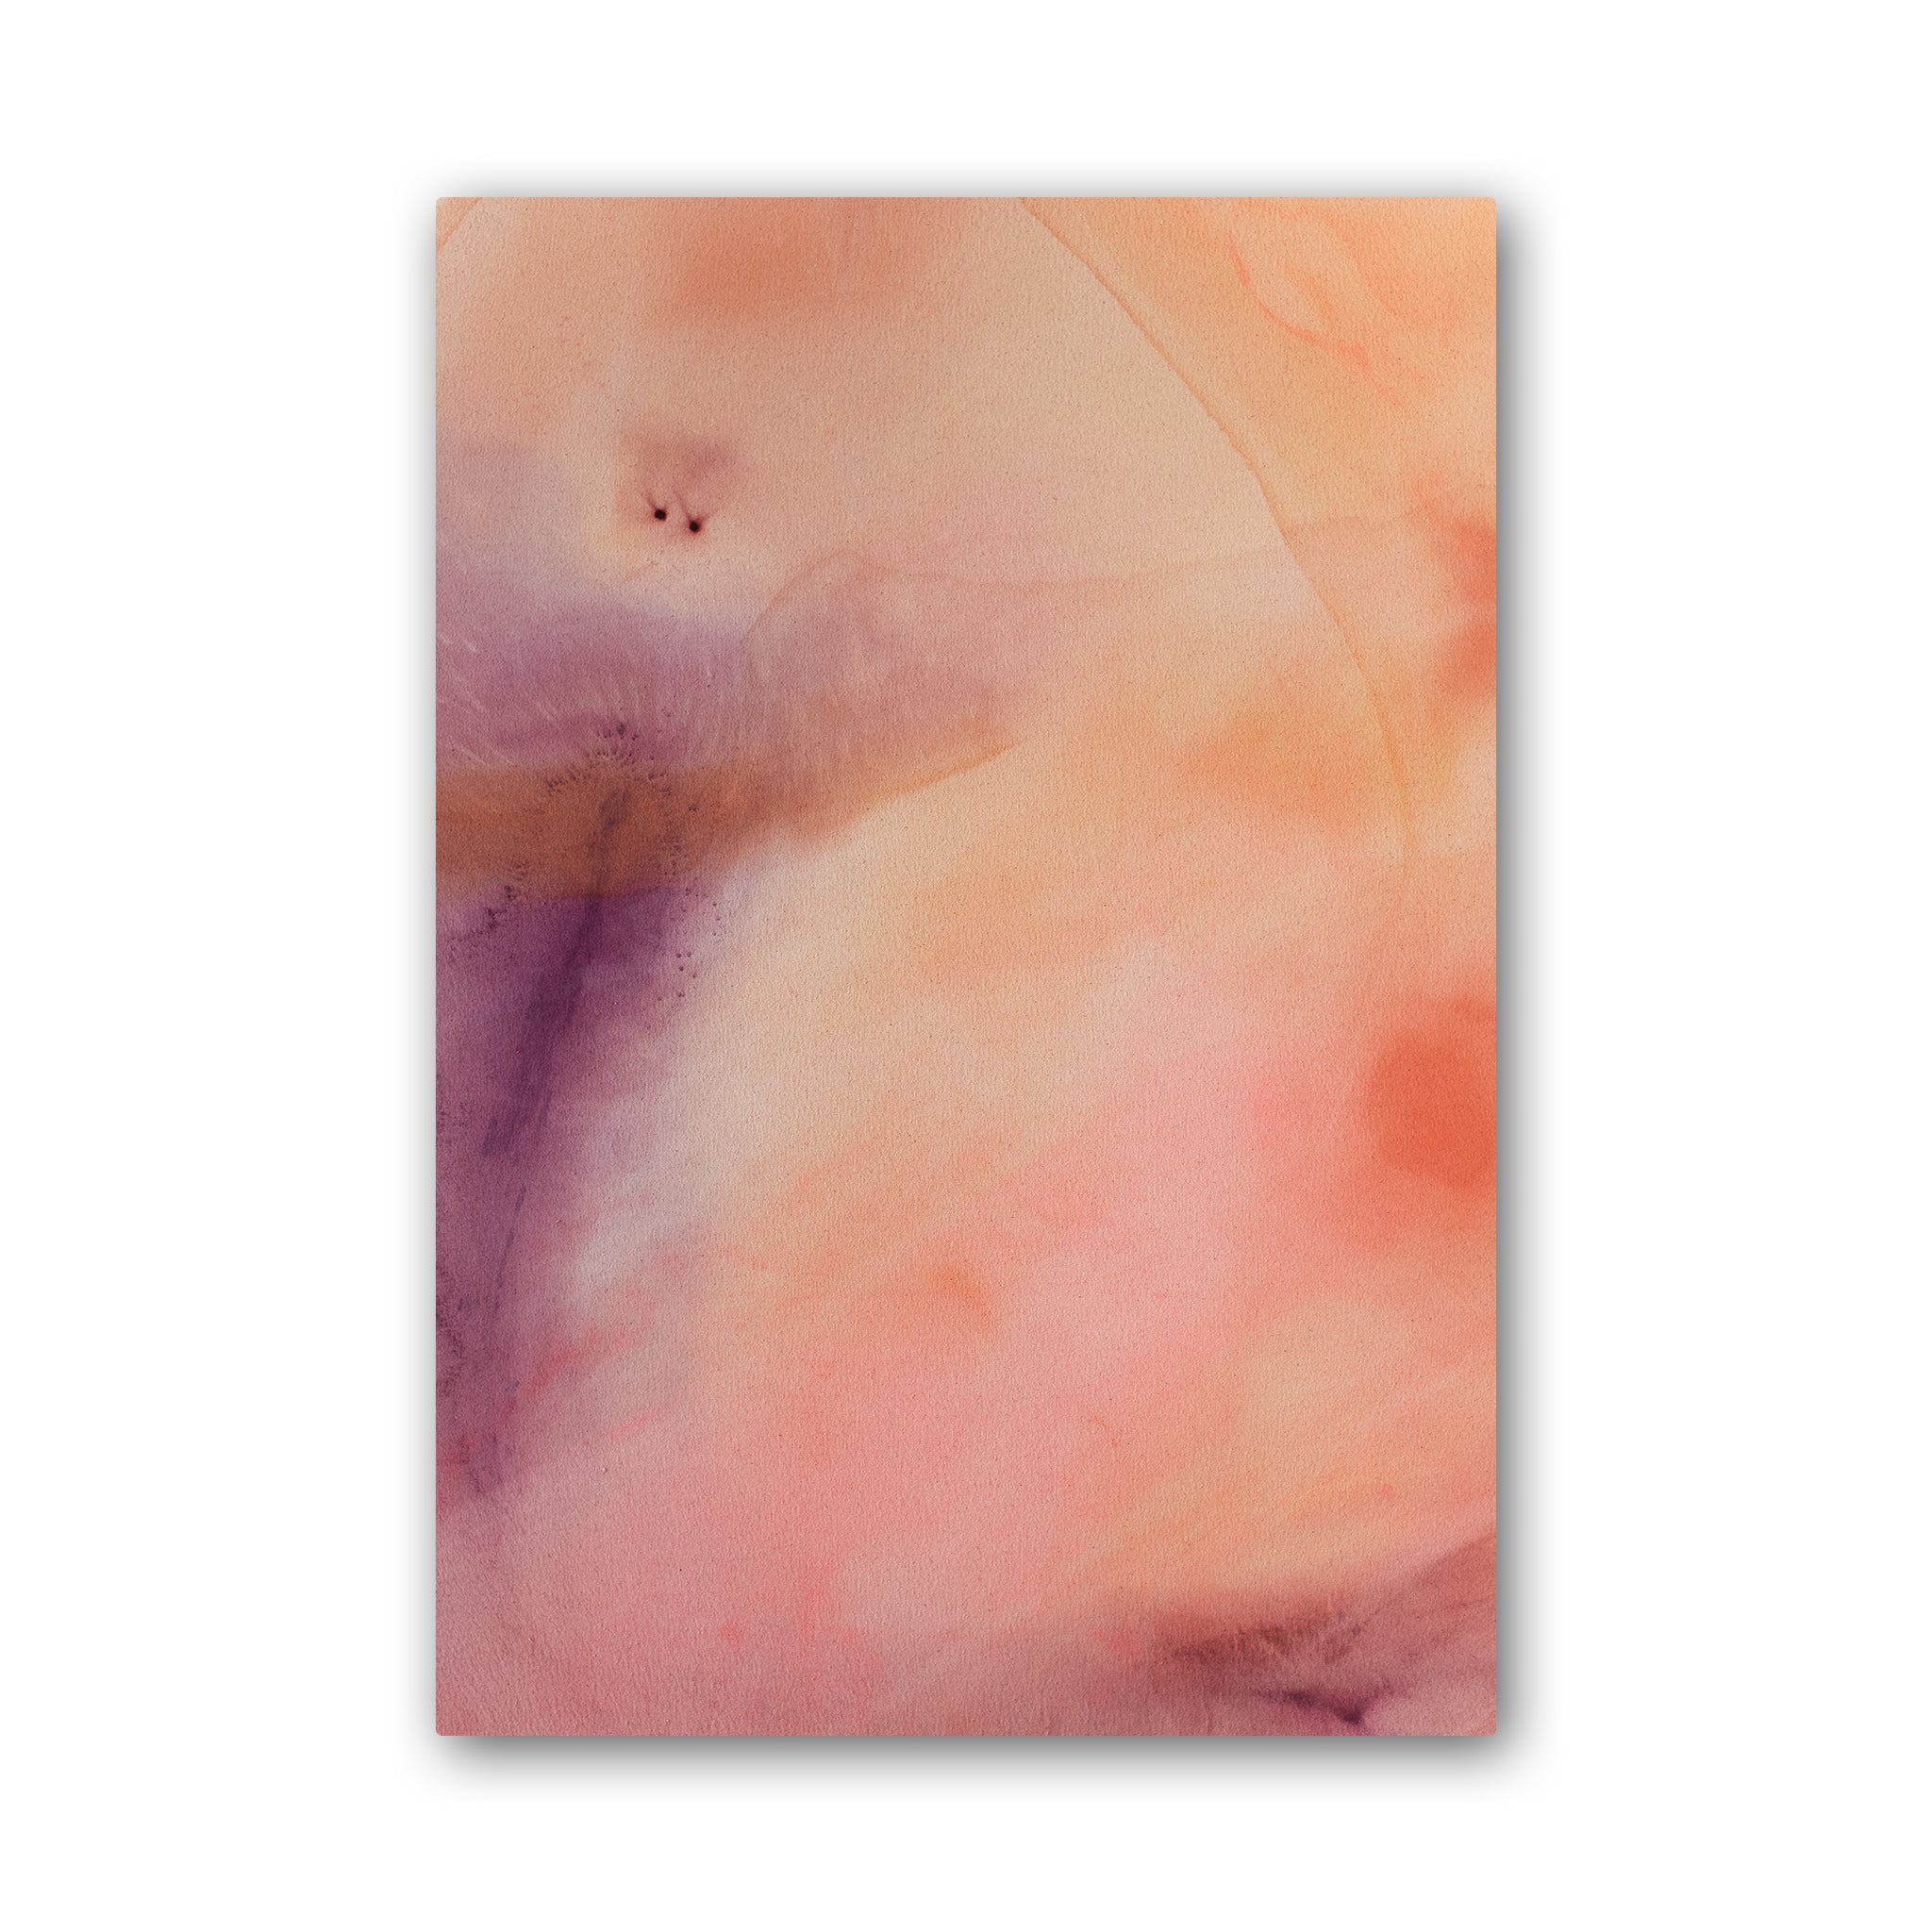 An abstract painting made with acrylic washes of purple, pink, and yellow.